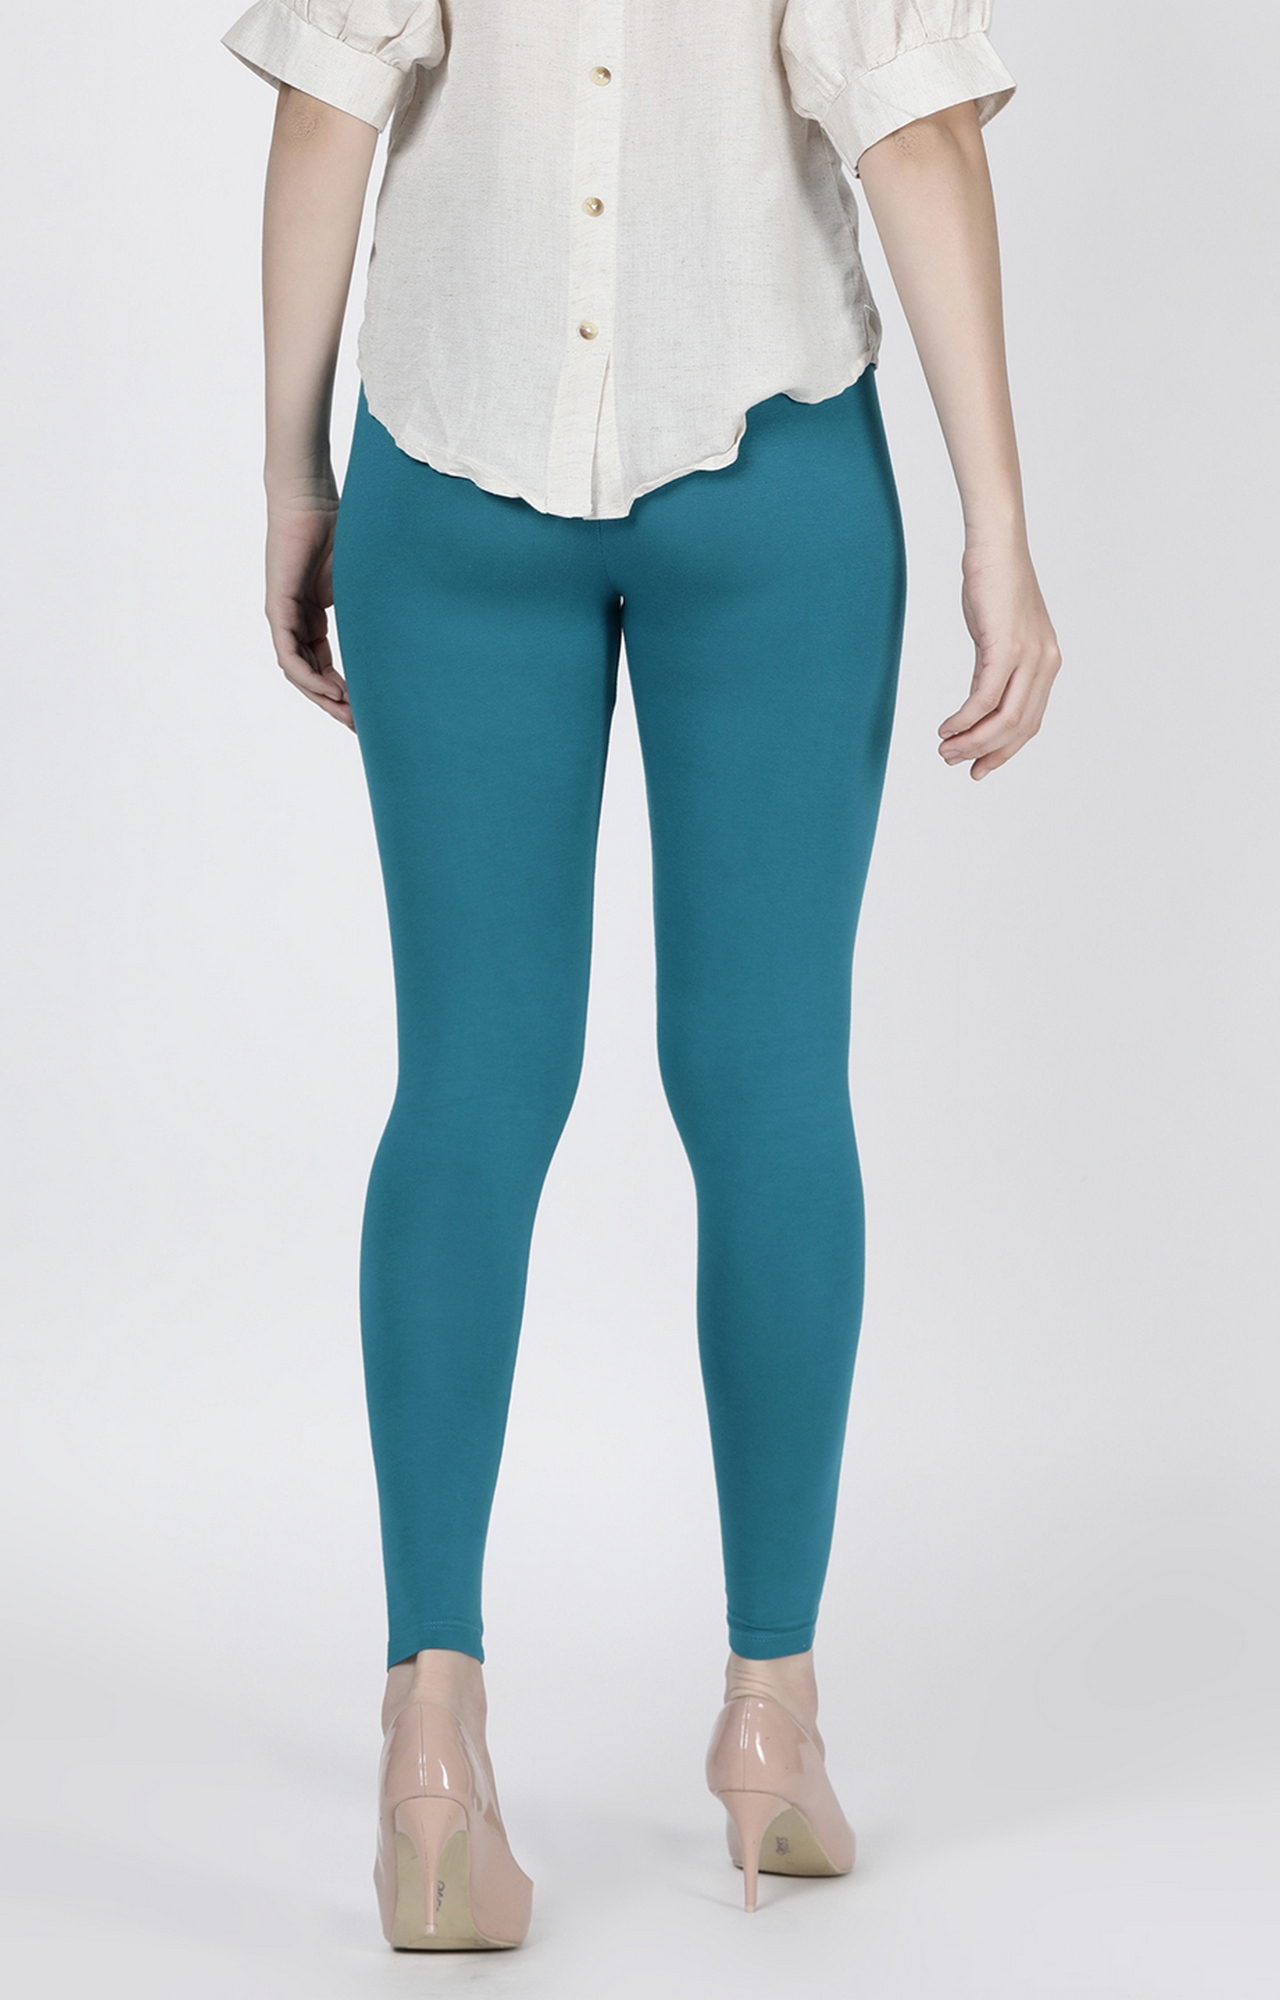 Twinbirds Pagoda Blue Solid Ankle Legging